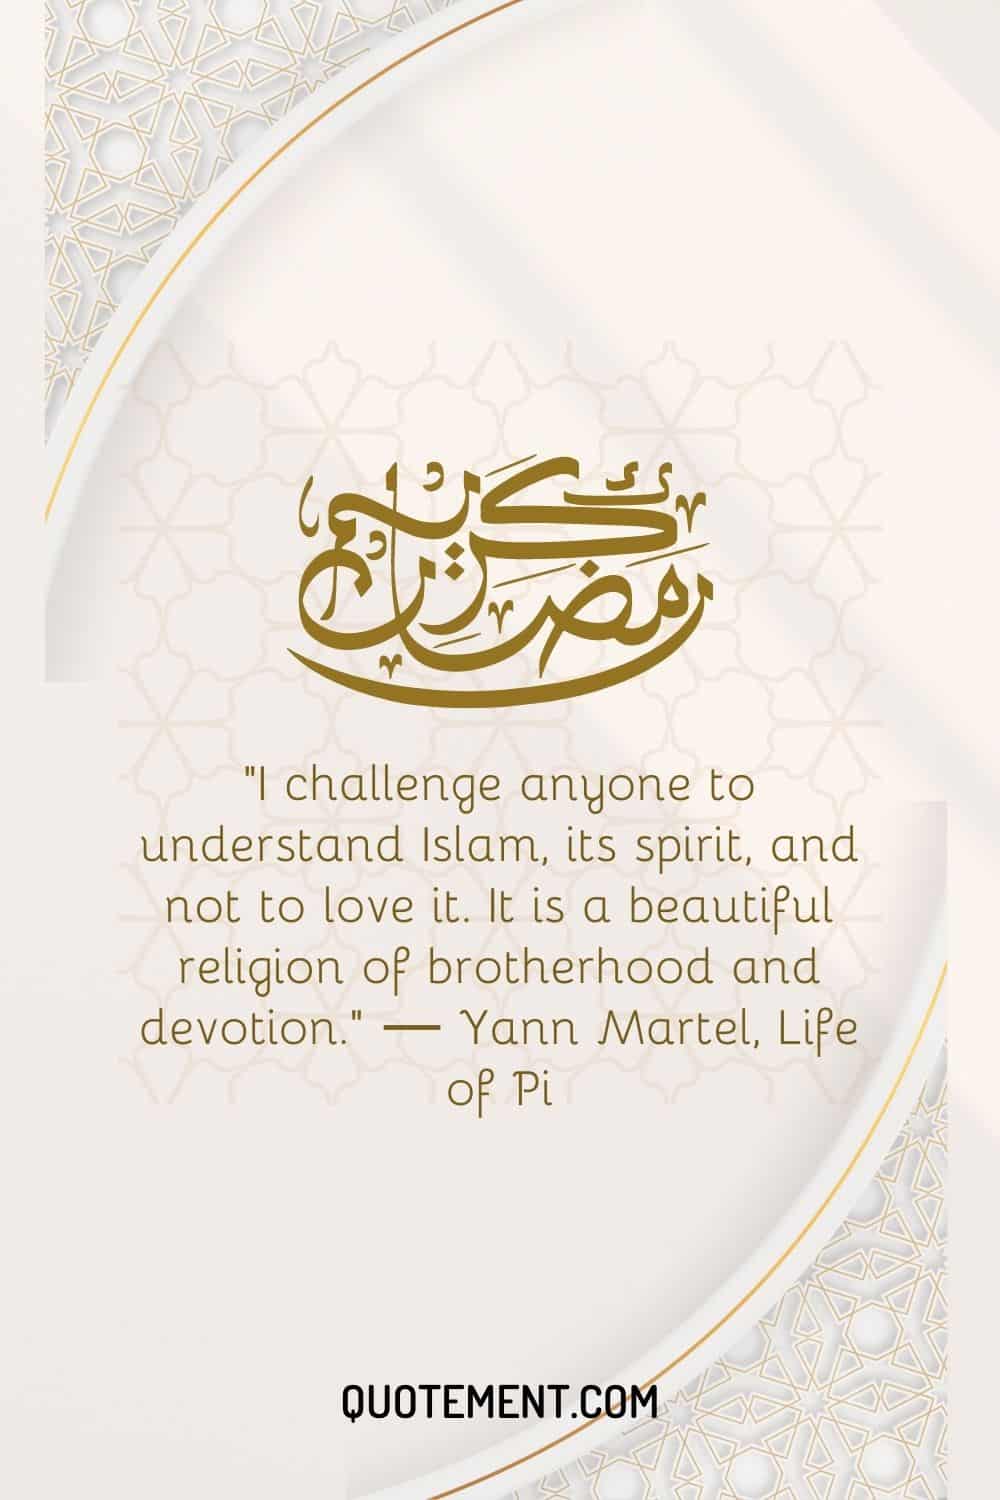 I challenge anyone to understand Islam, its spirit, and not to love it. It is a beautiful religion of brotherhood and devotion